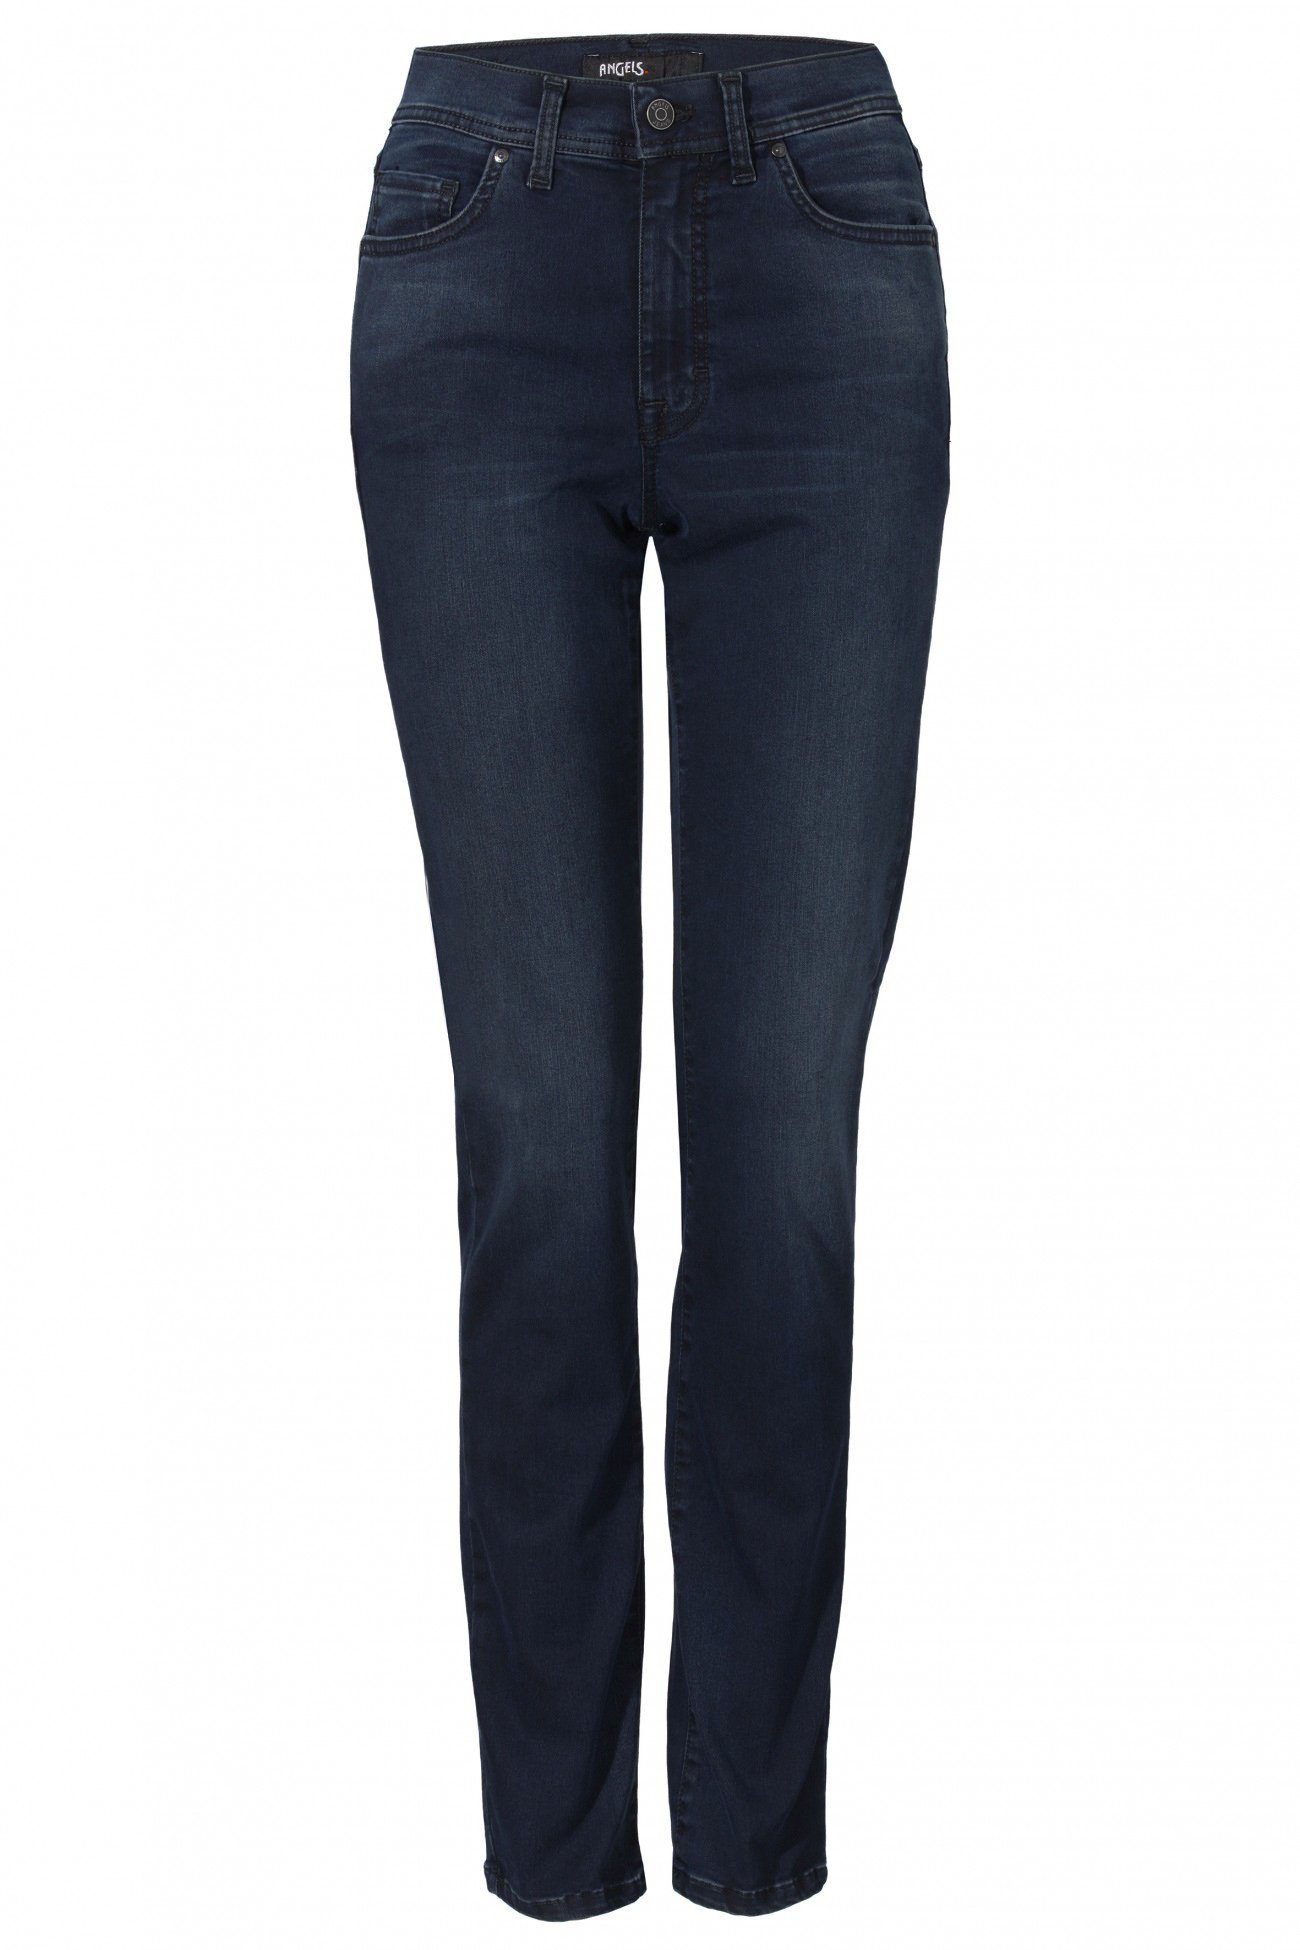 CICI blue JEANS 34.30 night ANGELS 519 night blue Stretch-Jeans ANGELS 30